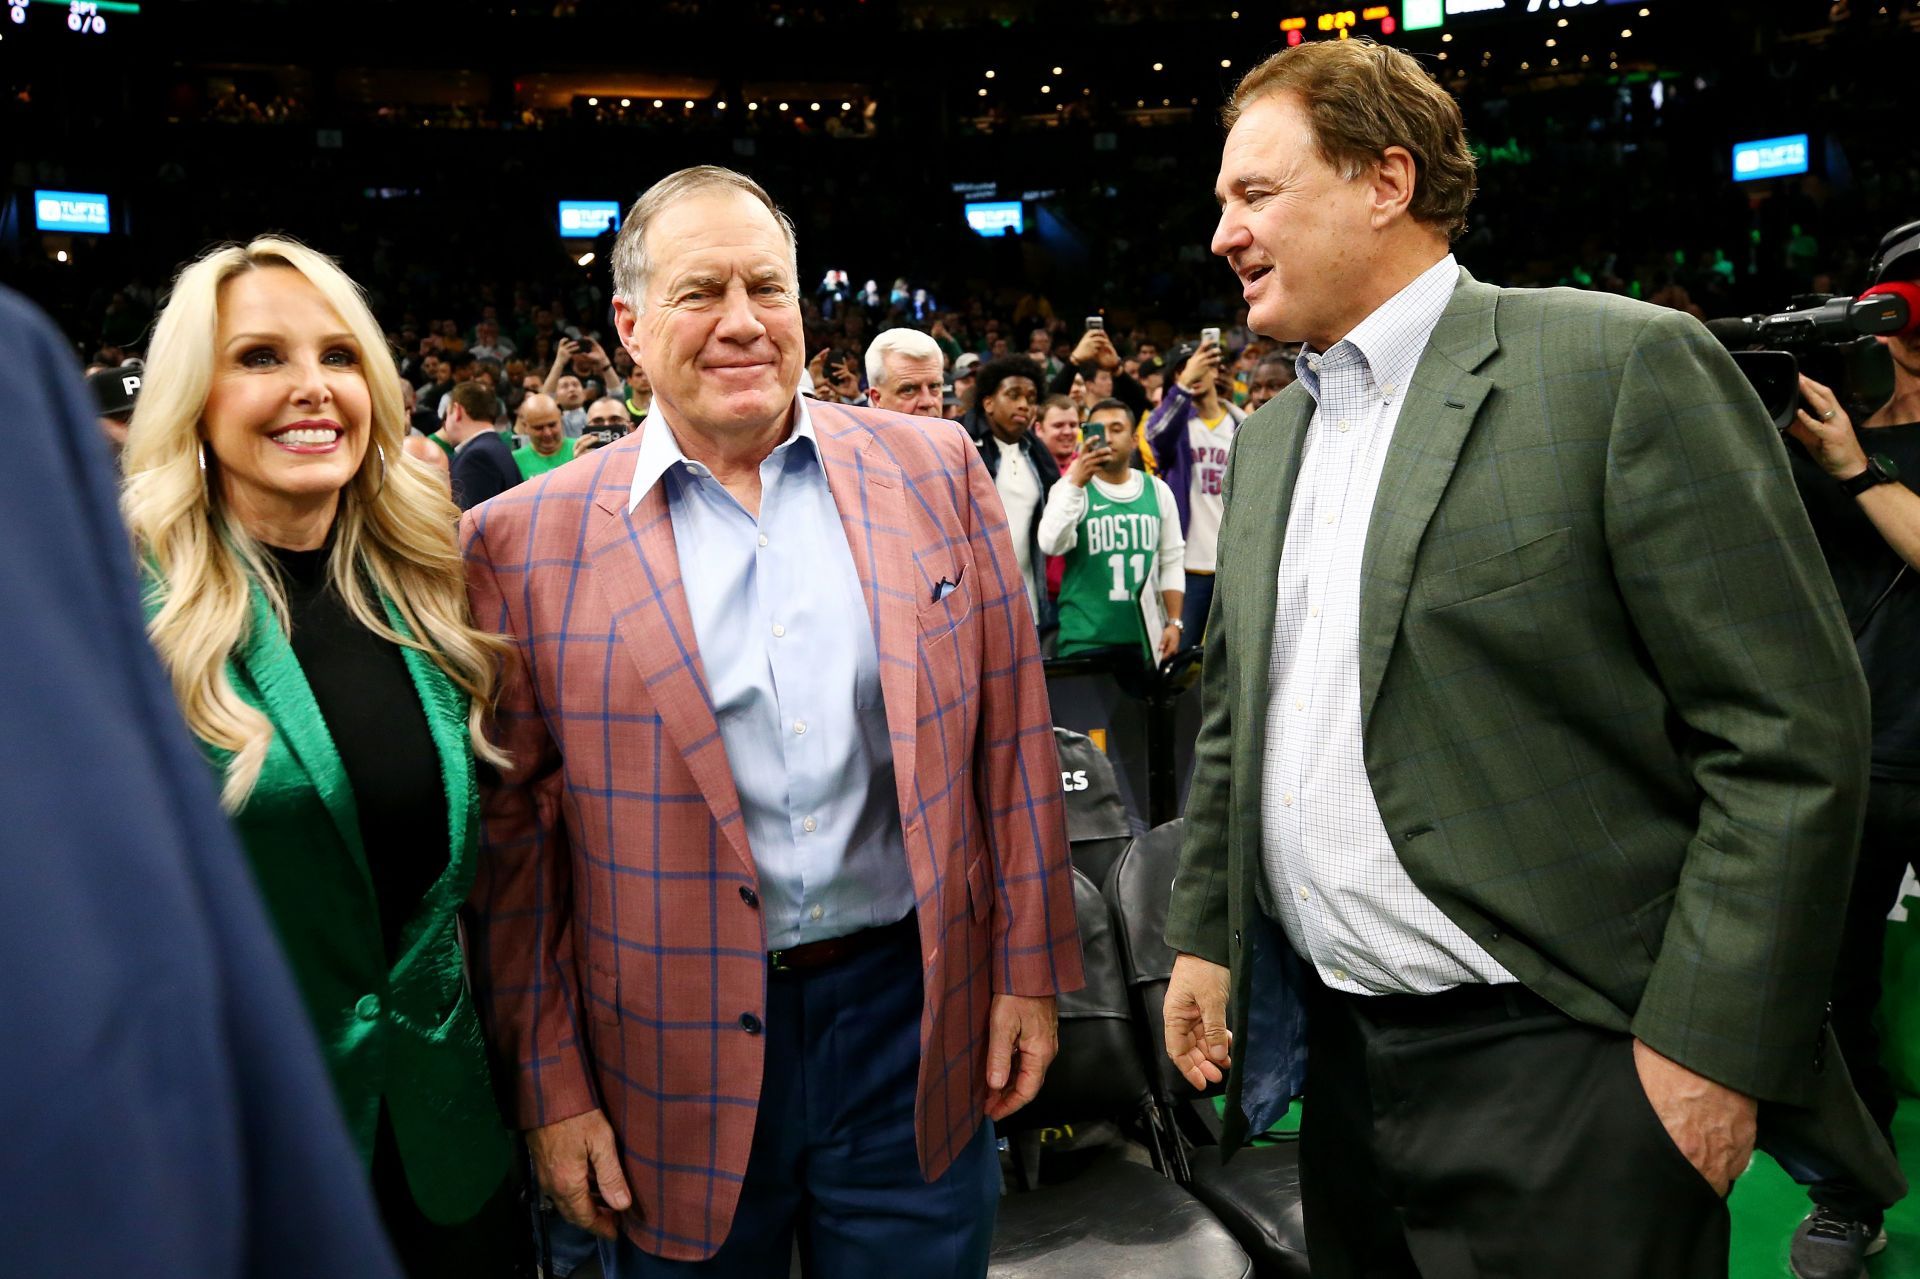 Stephen Pagliuca (R) is the co-owner of Boston Celtics